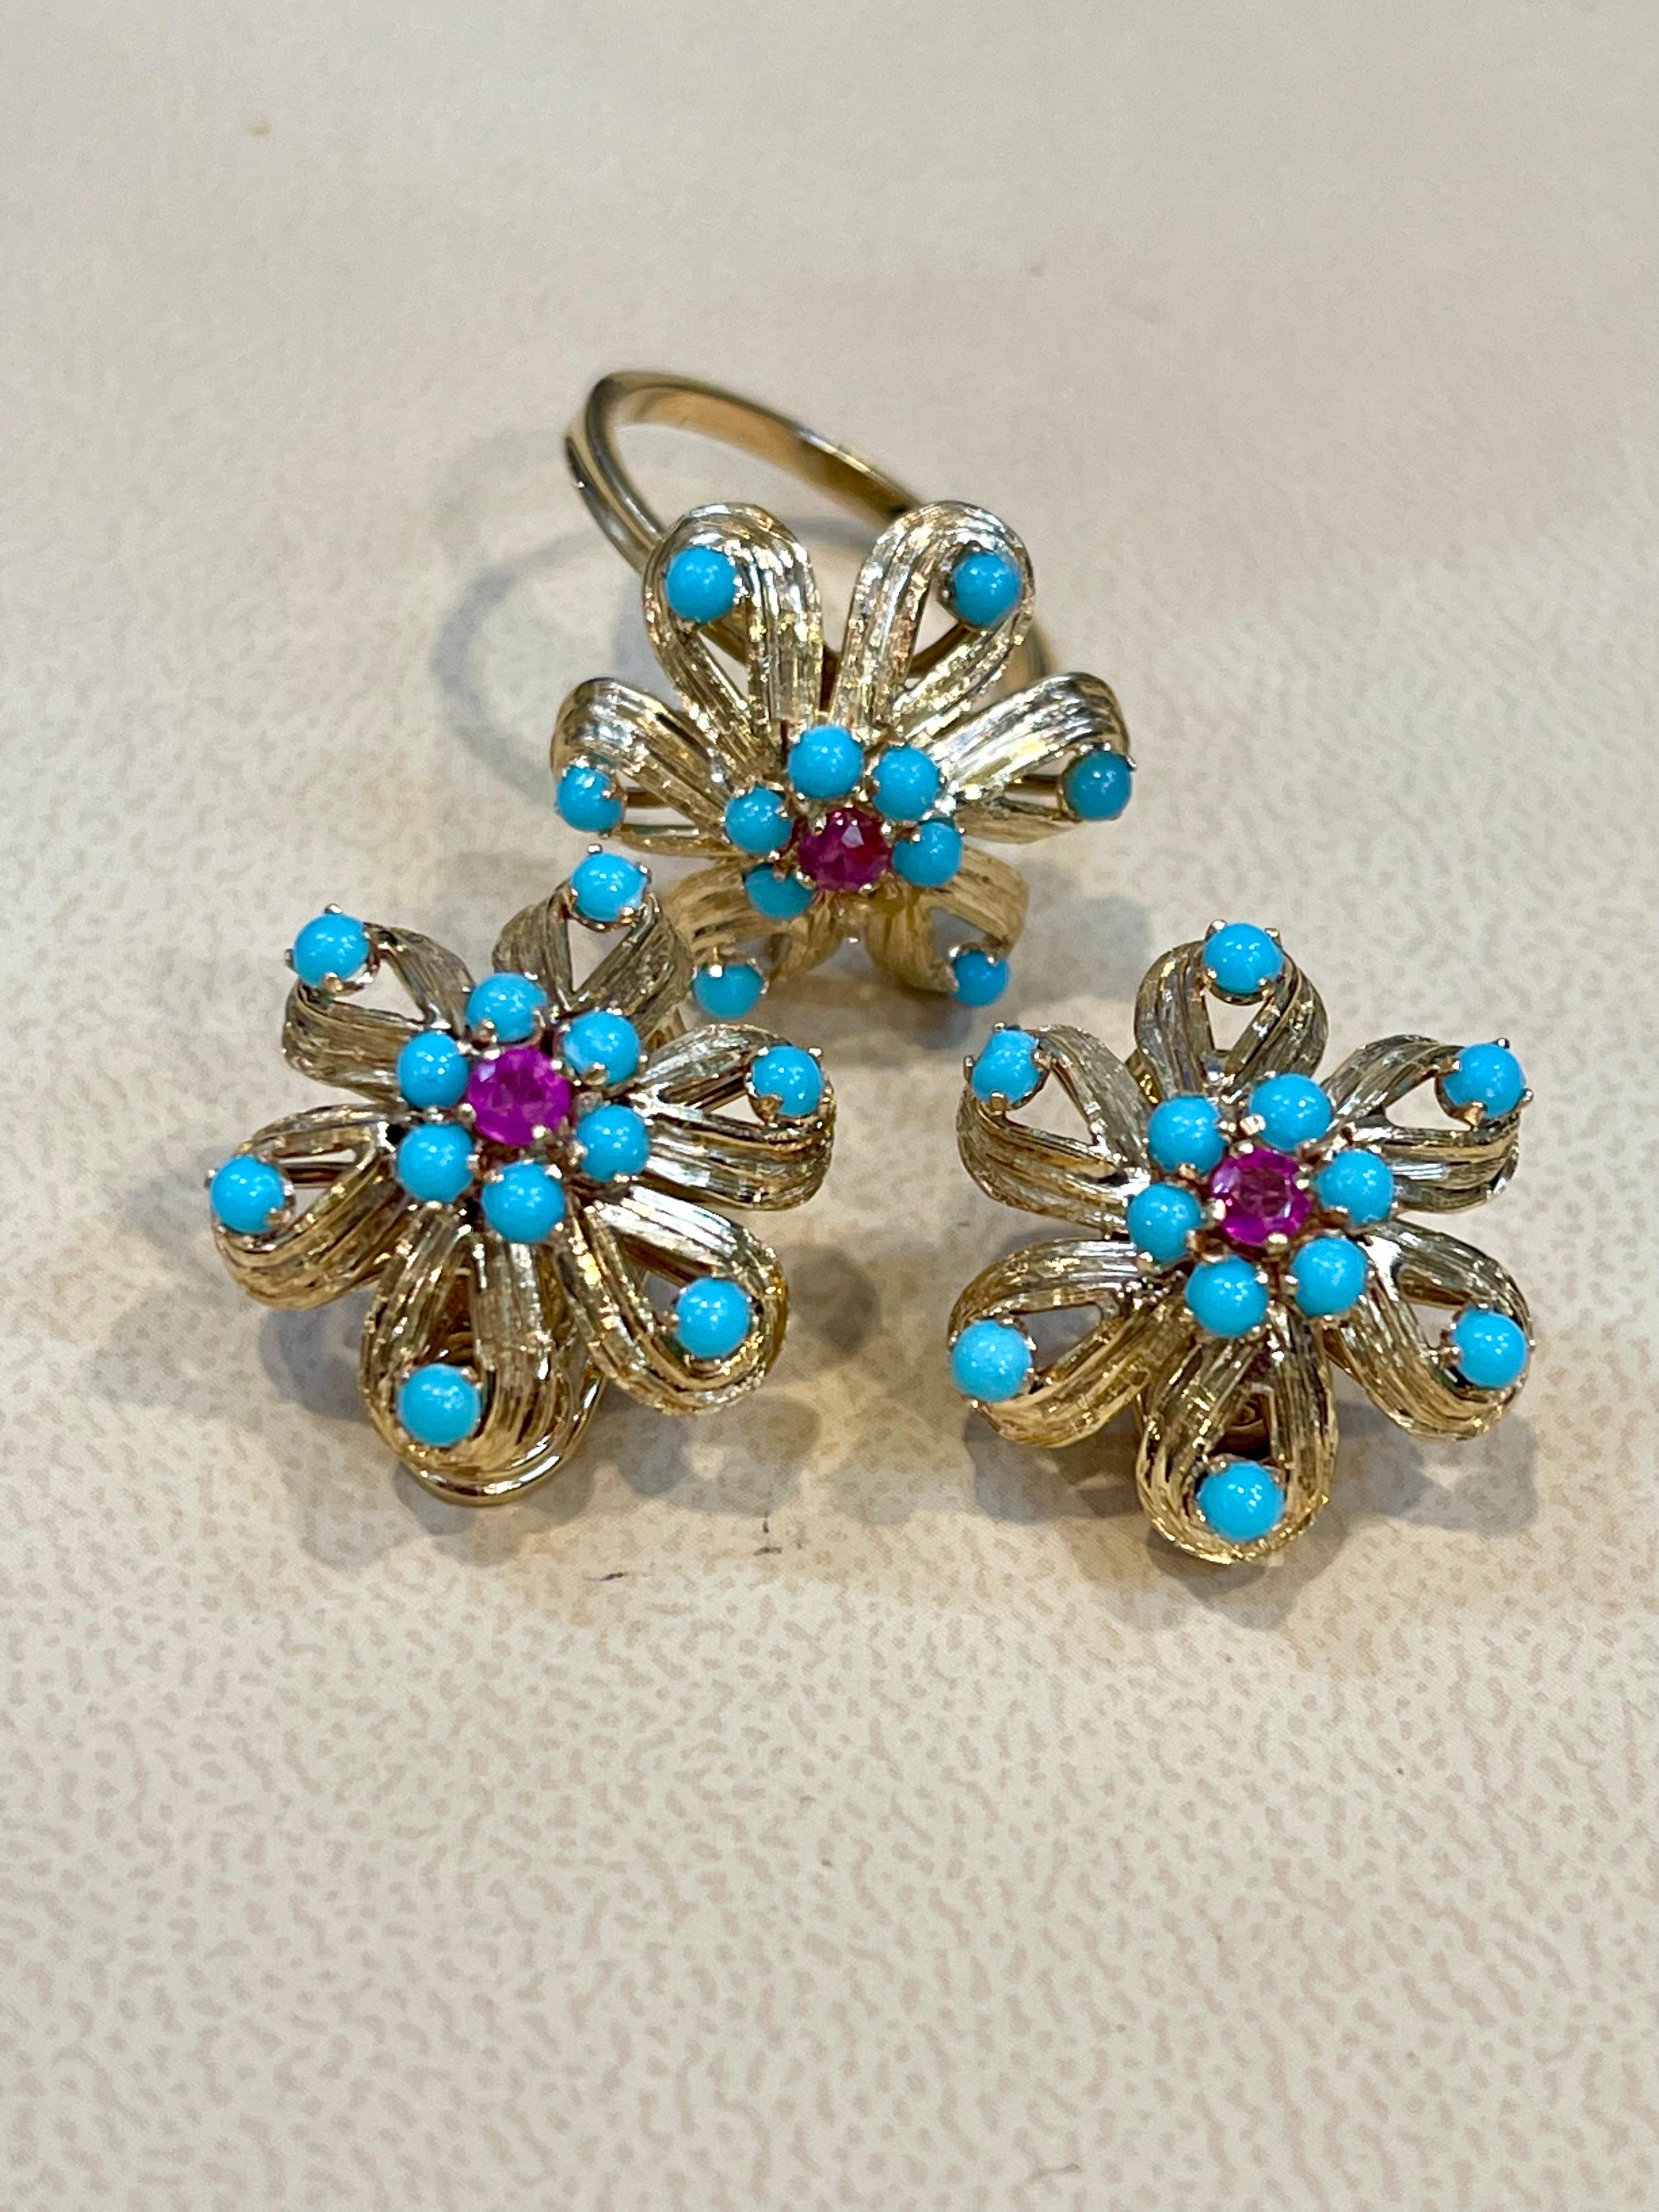 4 Ct Natural Turquoise & Ruby 18 Kt Yellow Gold Flower Ring & Earring Set 20Gm For Sale 8